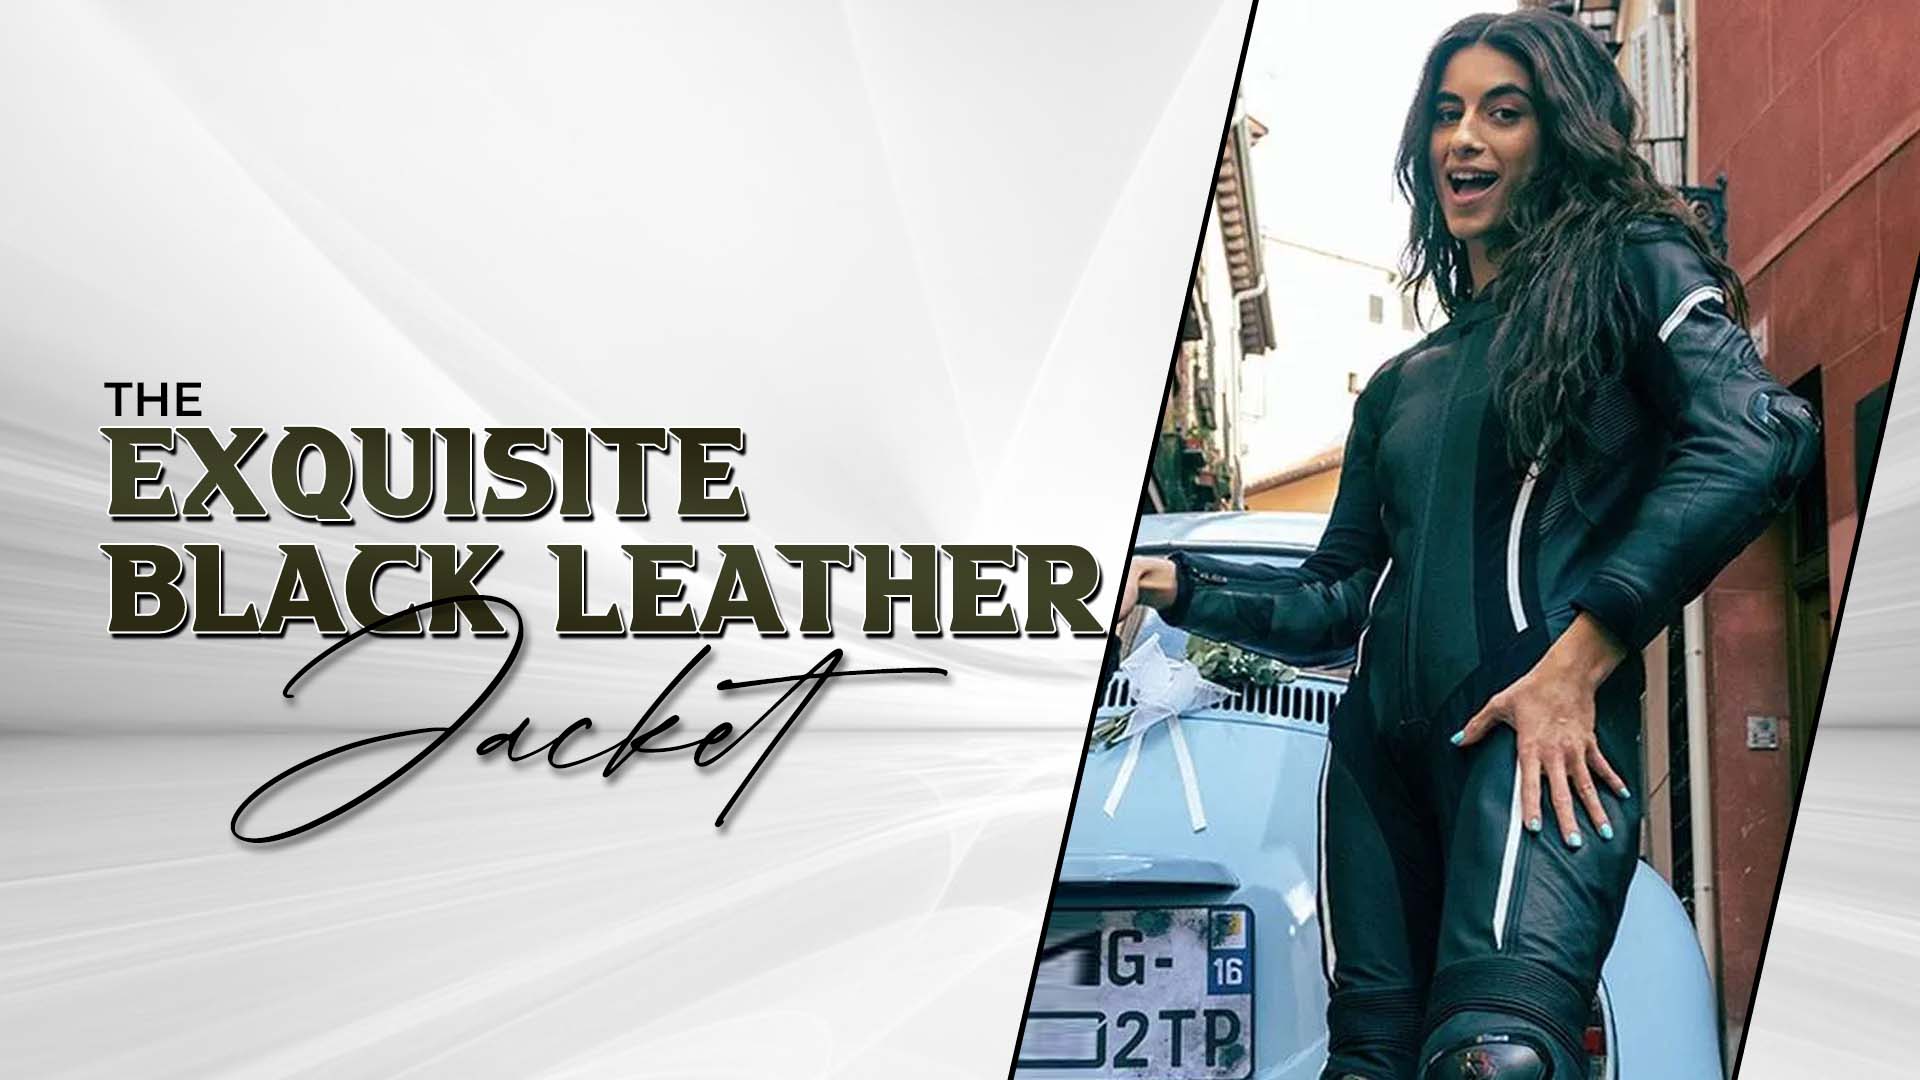 The Exquisite Black Leather Jacket